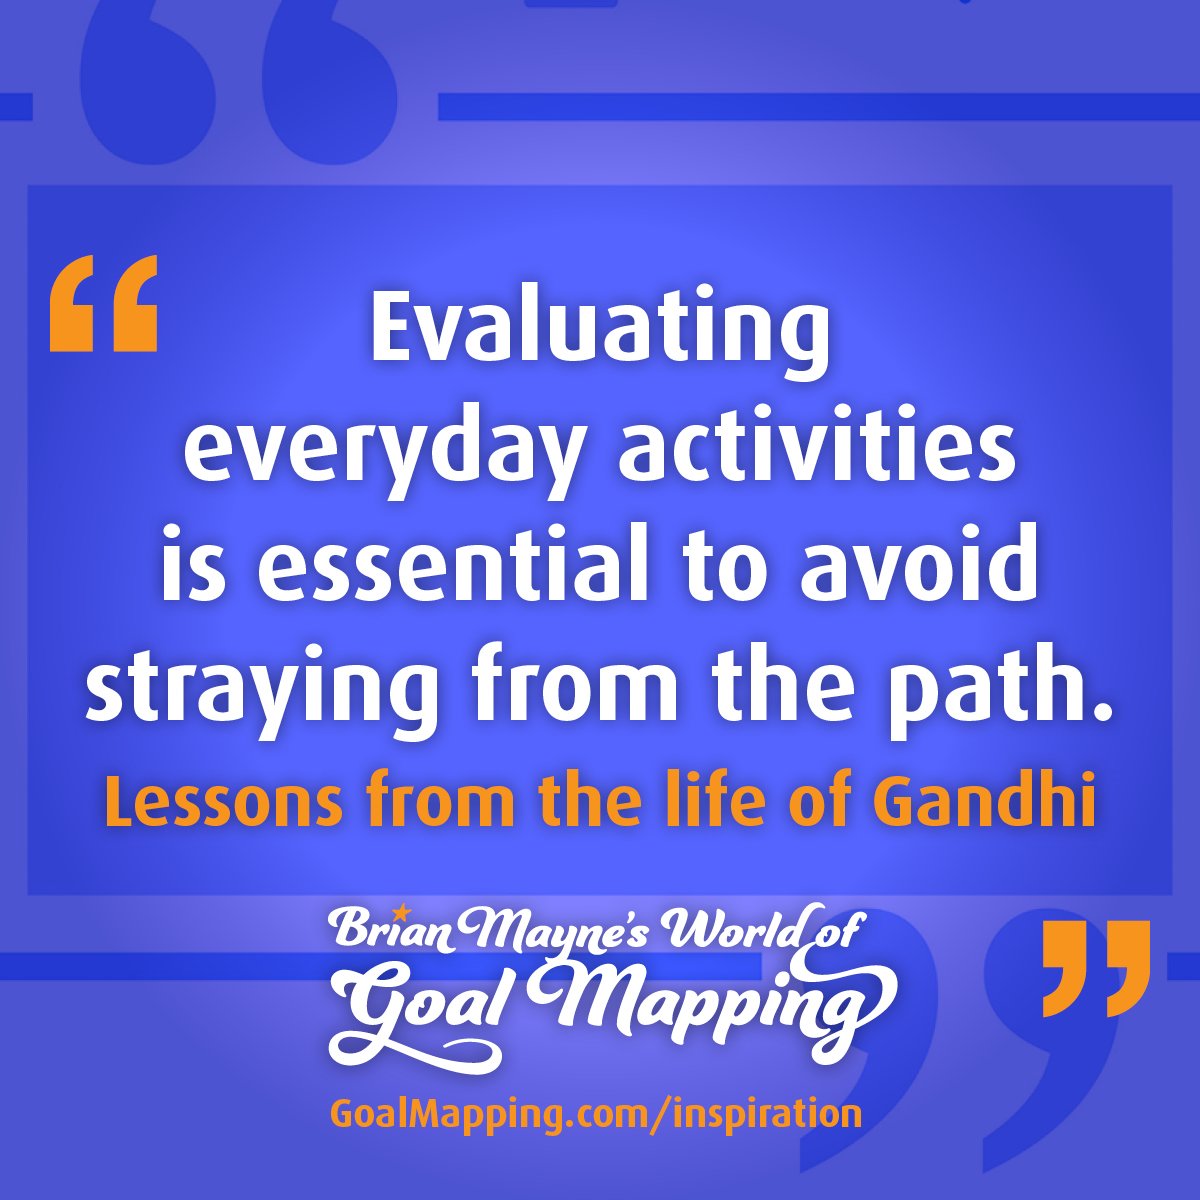 "Evaluating everyday activities is essential to avoid straying from the path." Lessons from the life of Gandhi